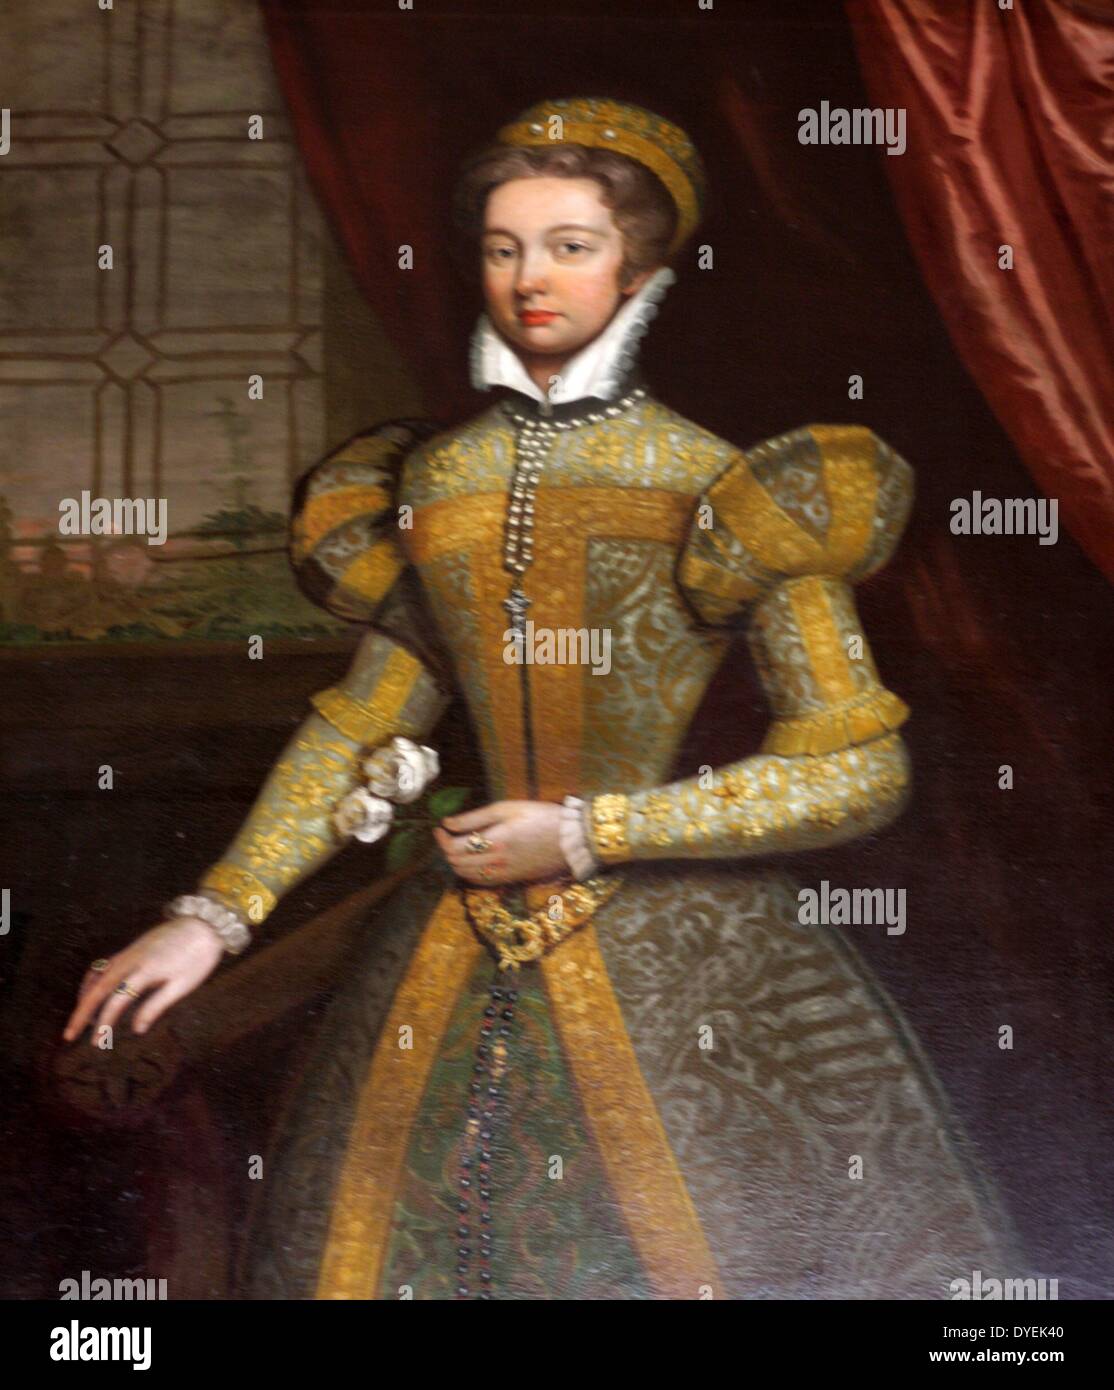 Mary Queen of Scots portrait by an early 18th century artist Stock Photo